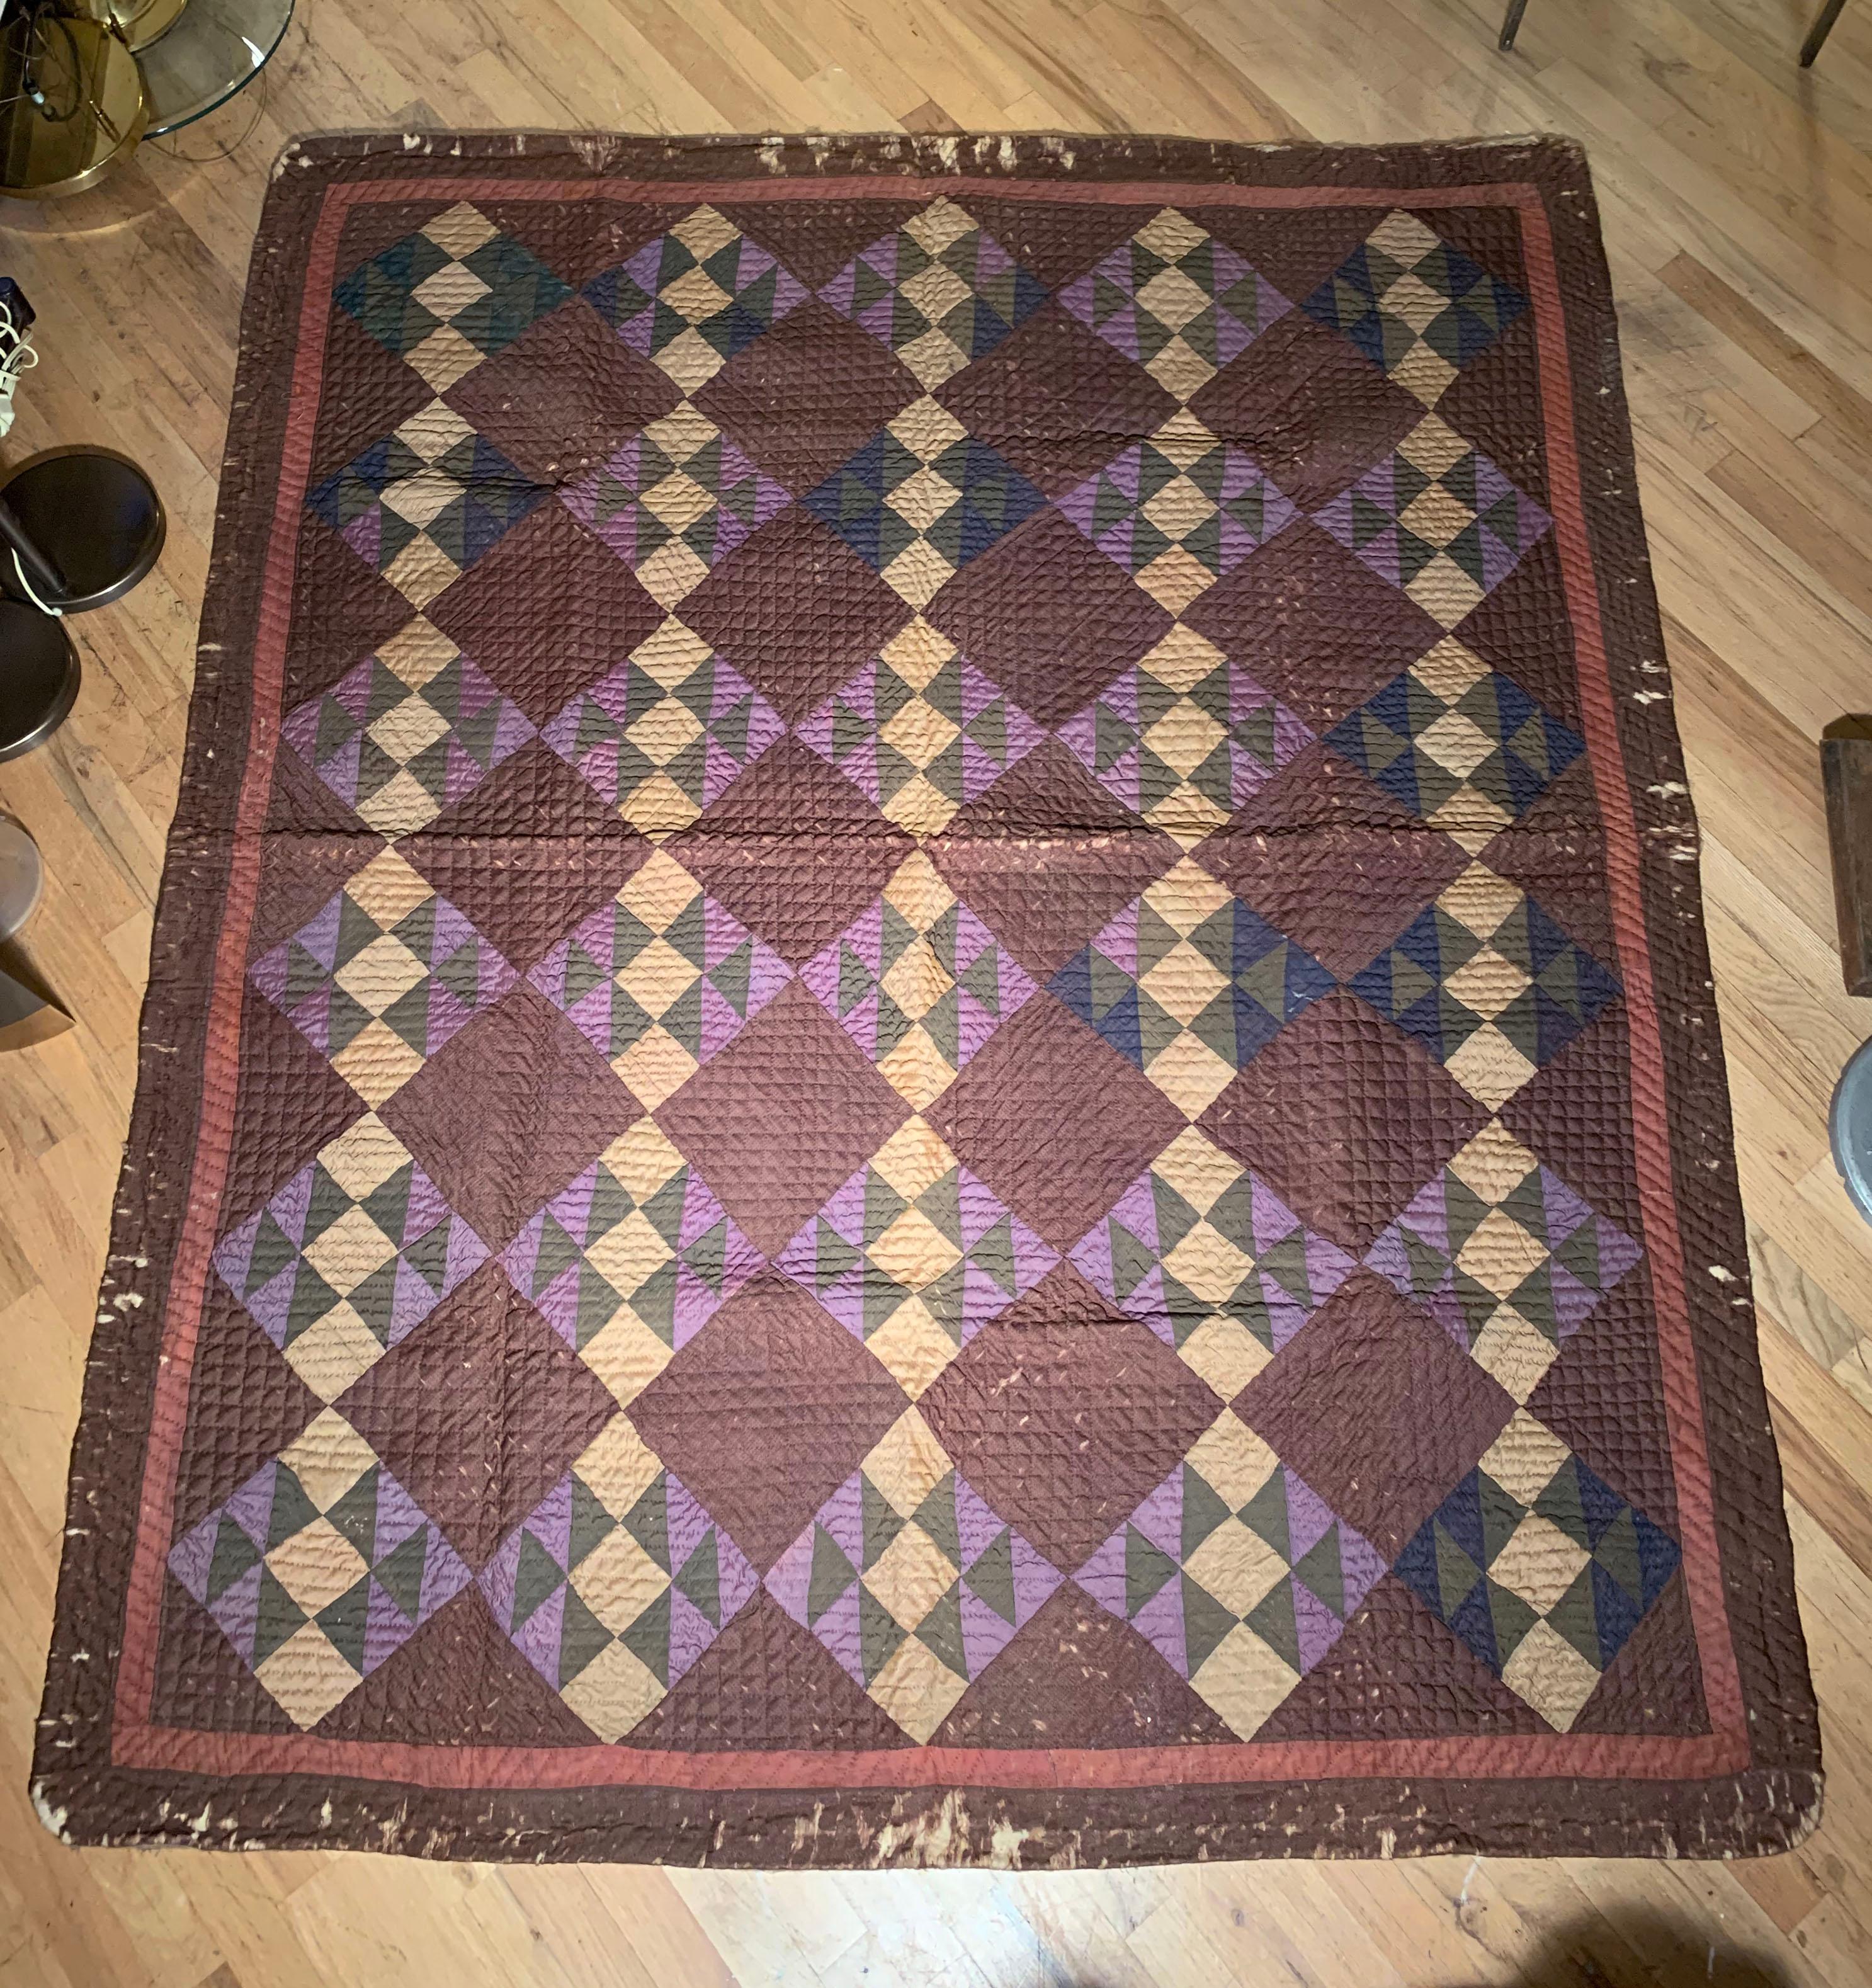 Beautiful old quilt attributed to the Amish. Very nice design and color pallet.
We believe this to be early 20th century.